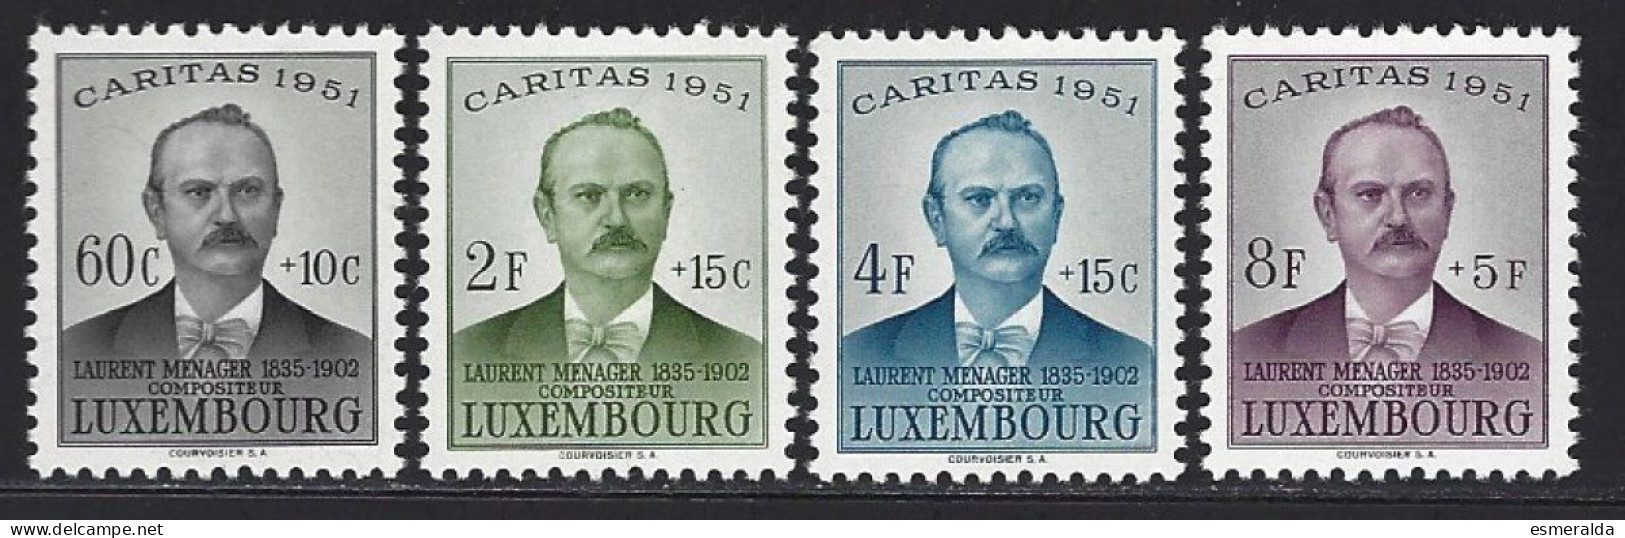 Luxembourg Yv 449/52, Caritas 1951,Laurent Ménager,compositeur.  **/mnh - Nuovi